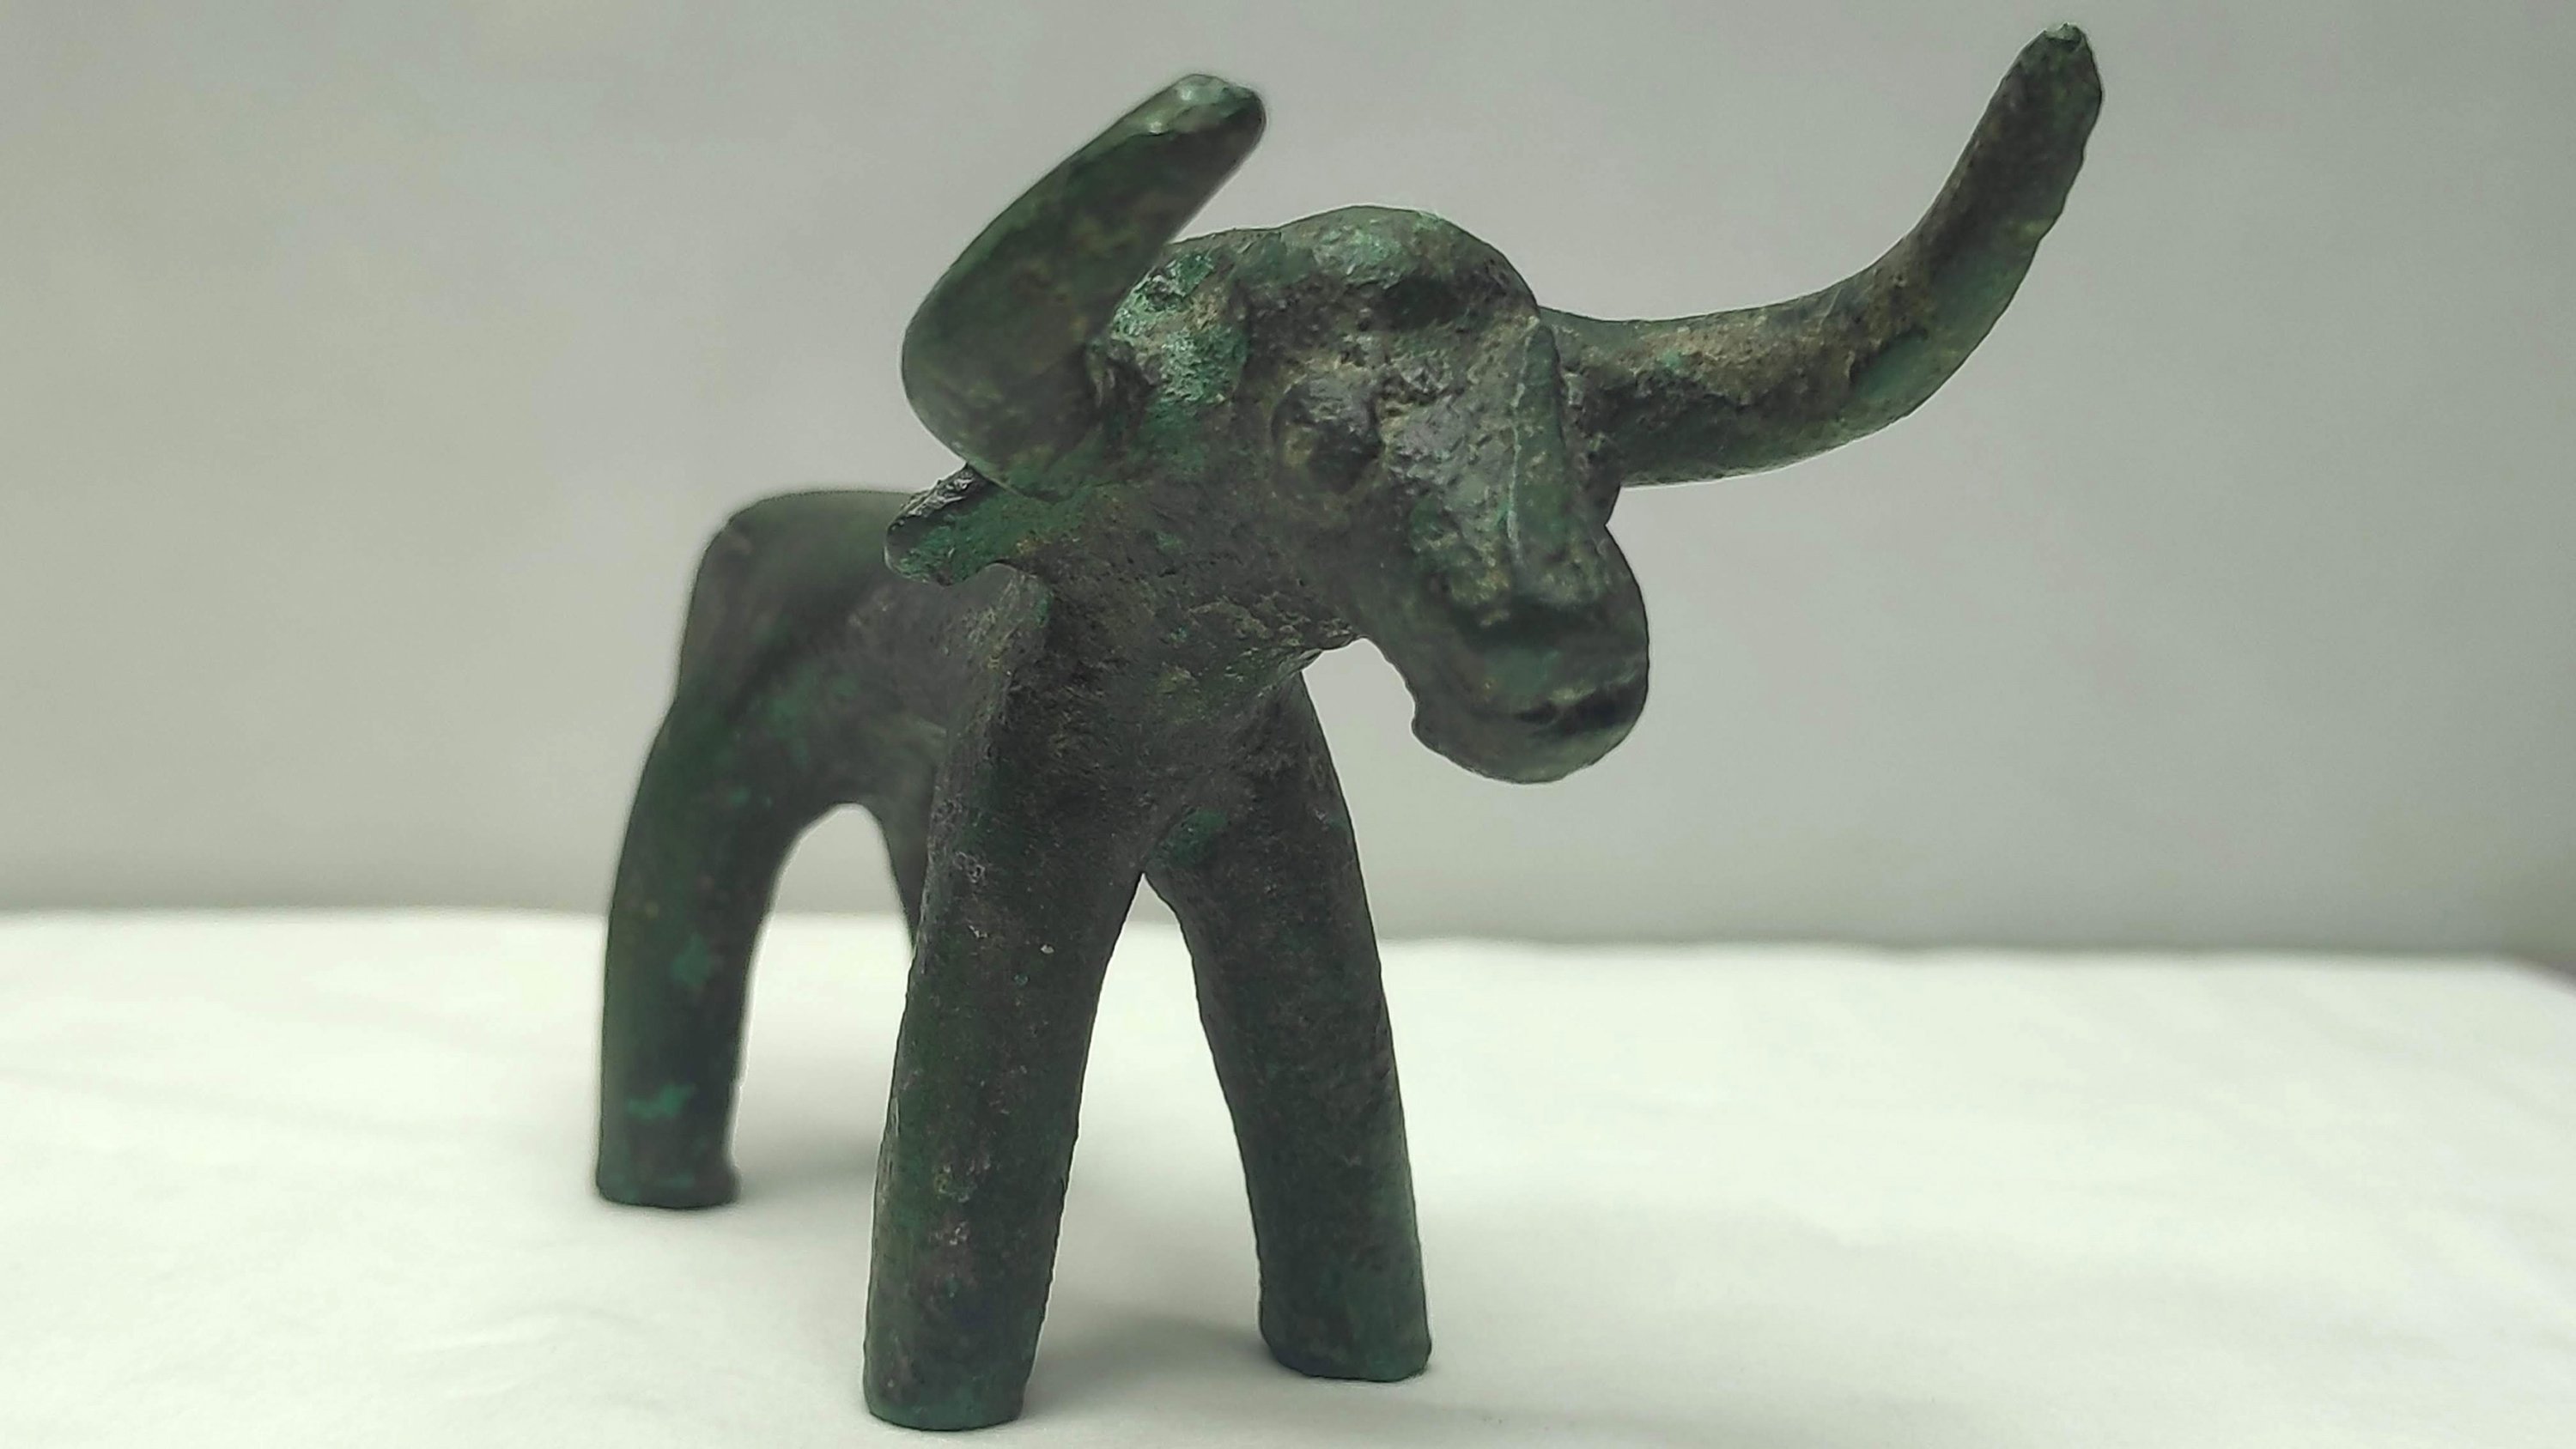 A bronze bull figurine can be seen which was found during an inspection conducted at the archaeological site of Ancient Olympia, Peloponnese, Greece, March 19, 2021. (Greek Culture Ministry via EPA)